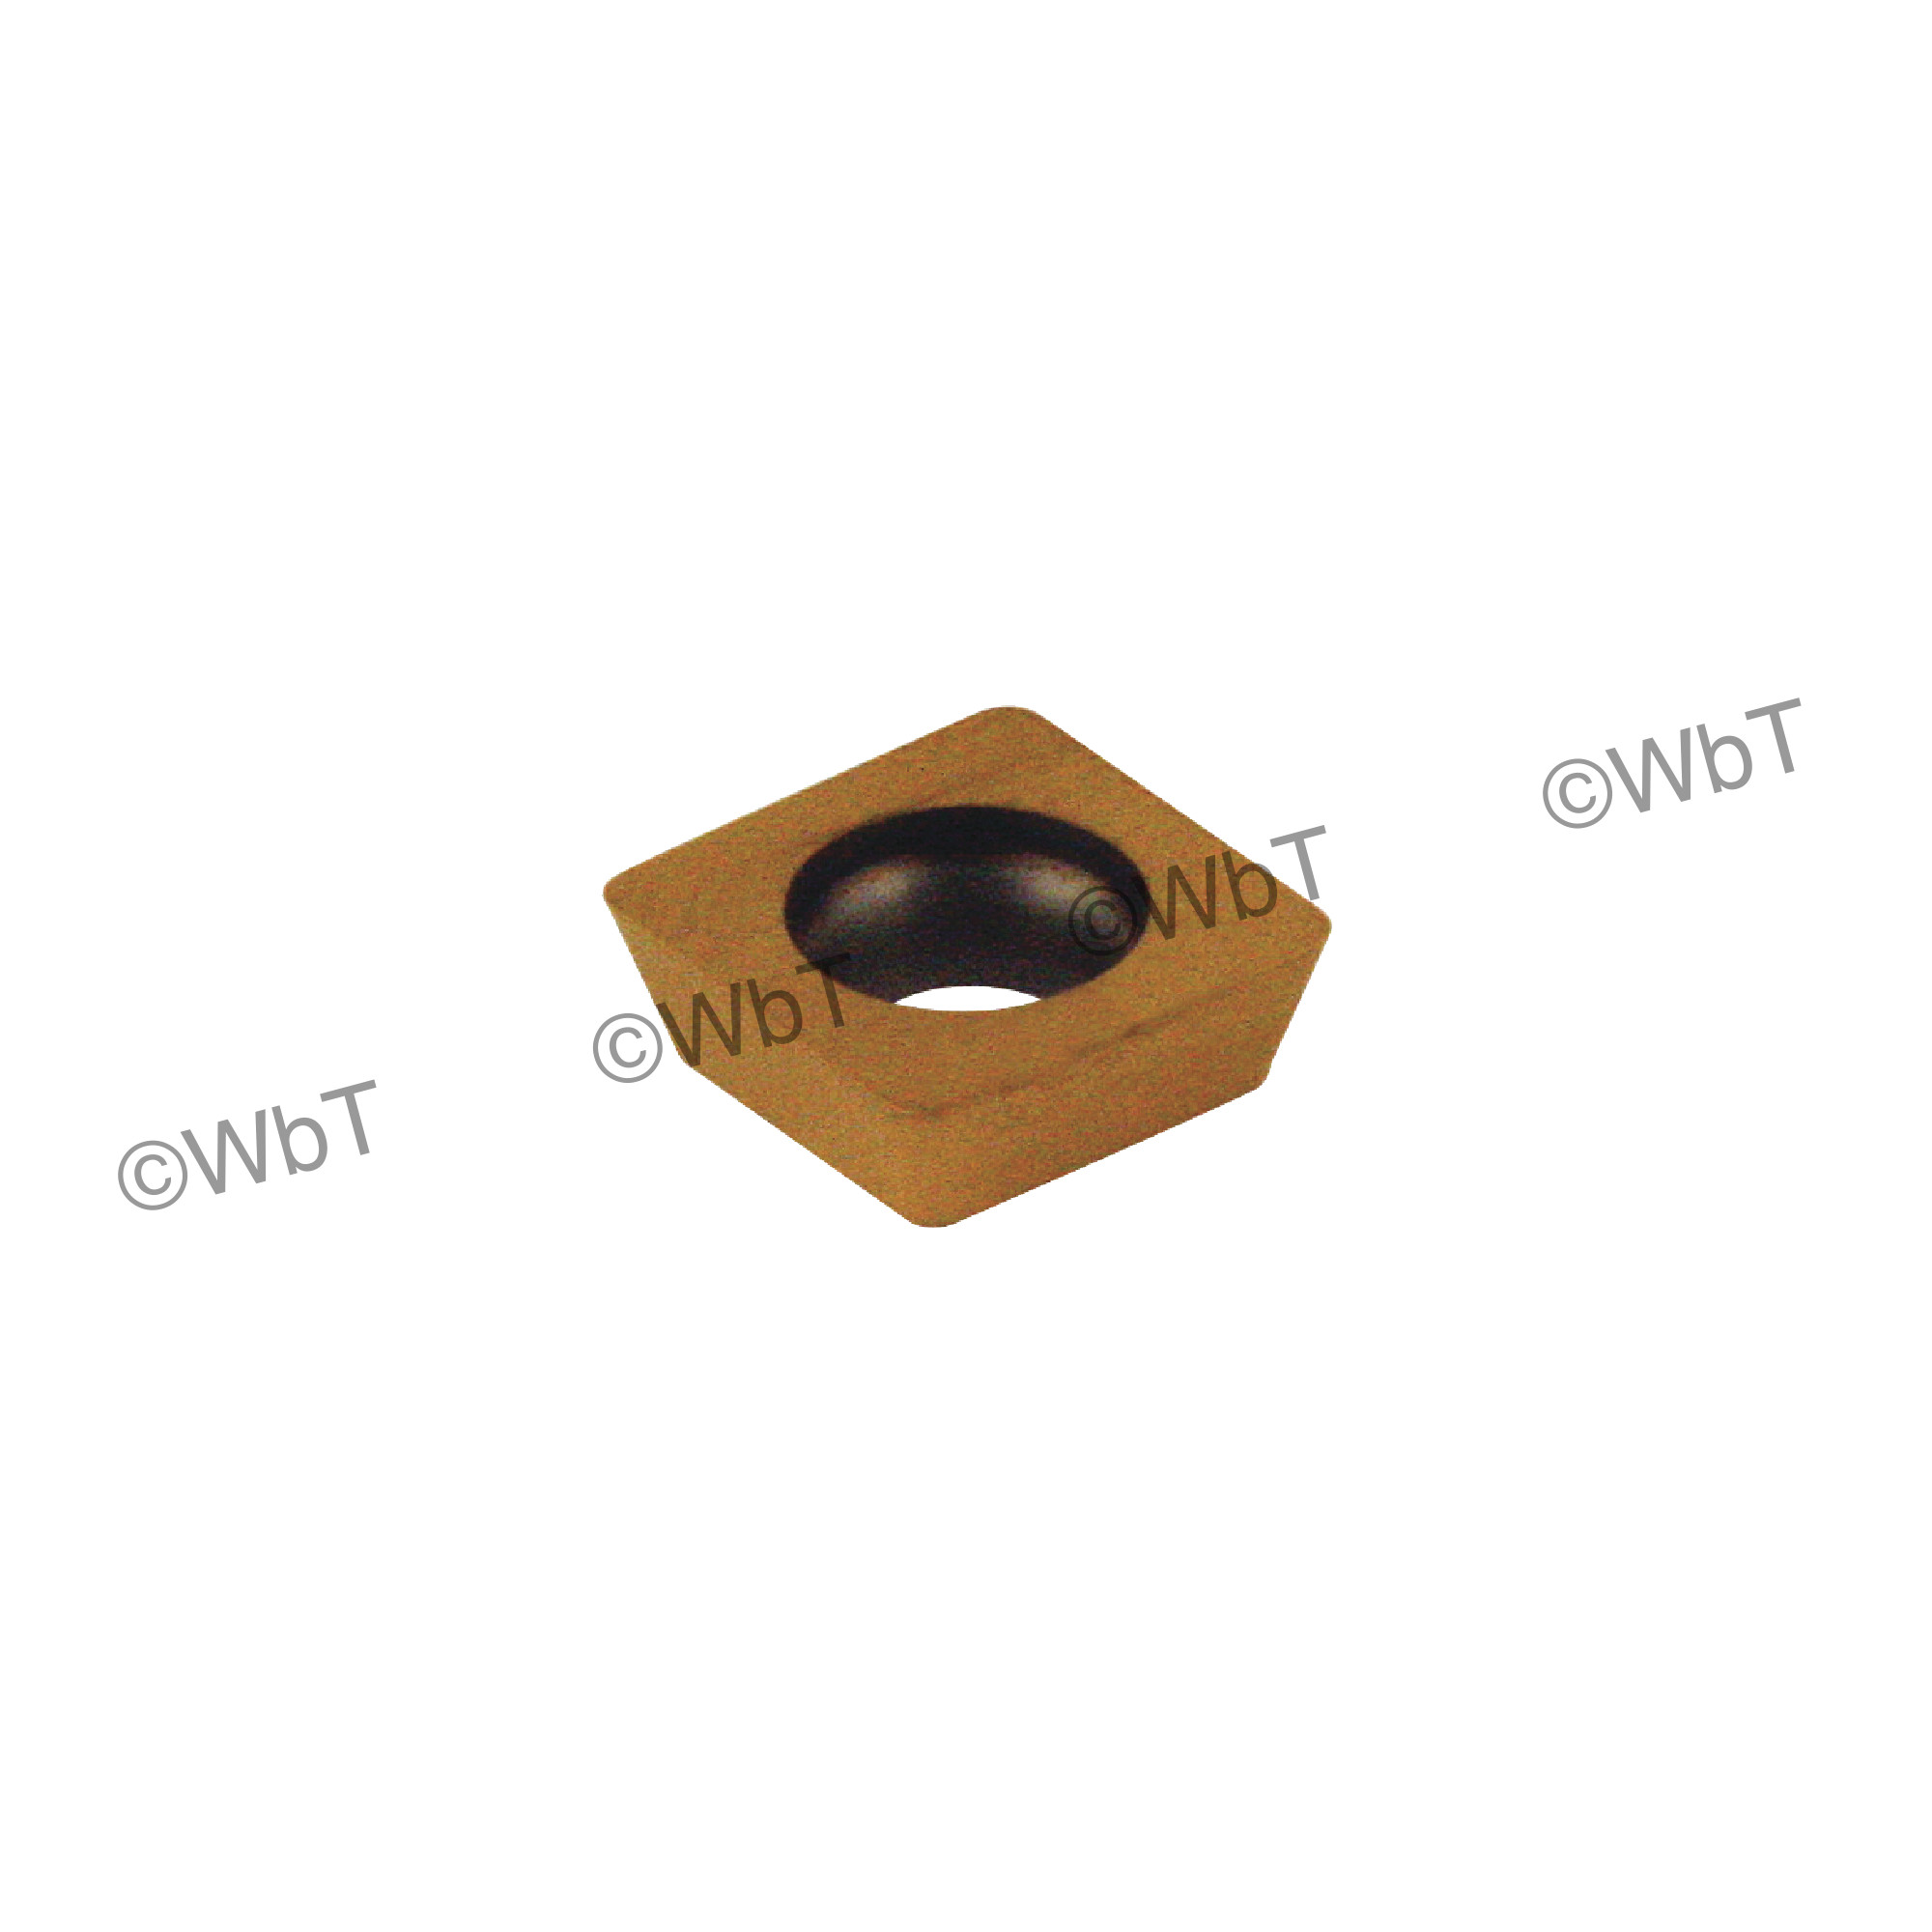 T&O - SDHW090308EN PC650 Square / INDEXABLE Carbide MILLING INSERT